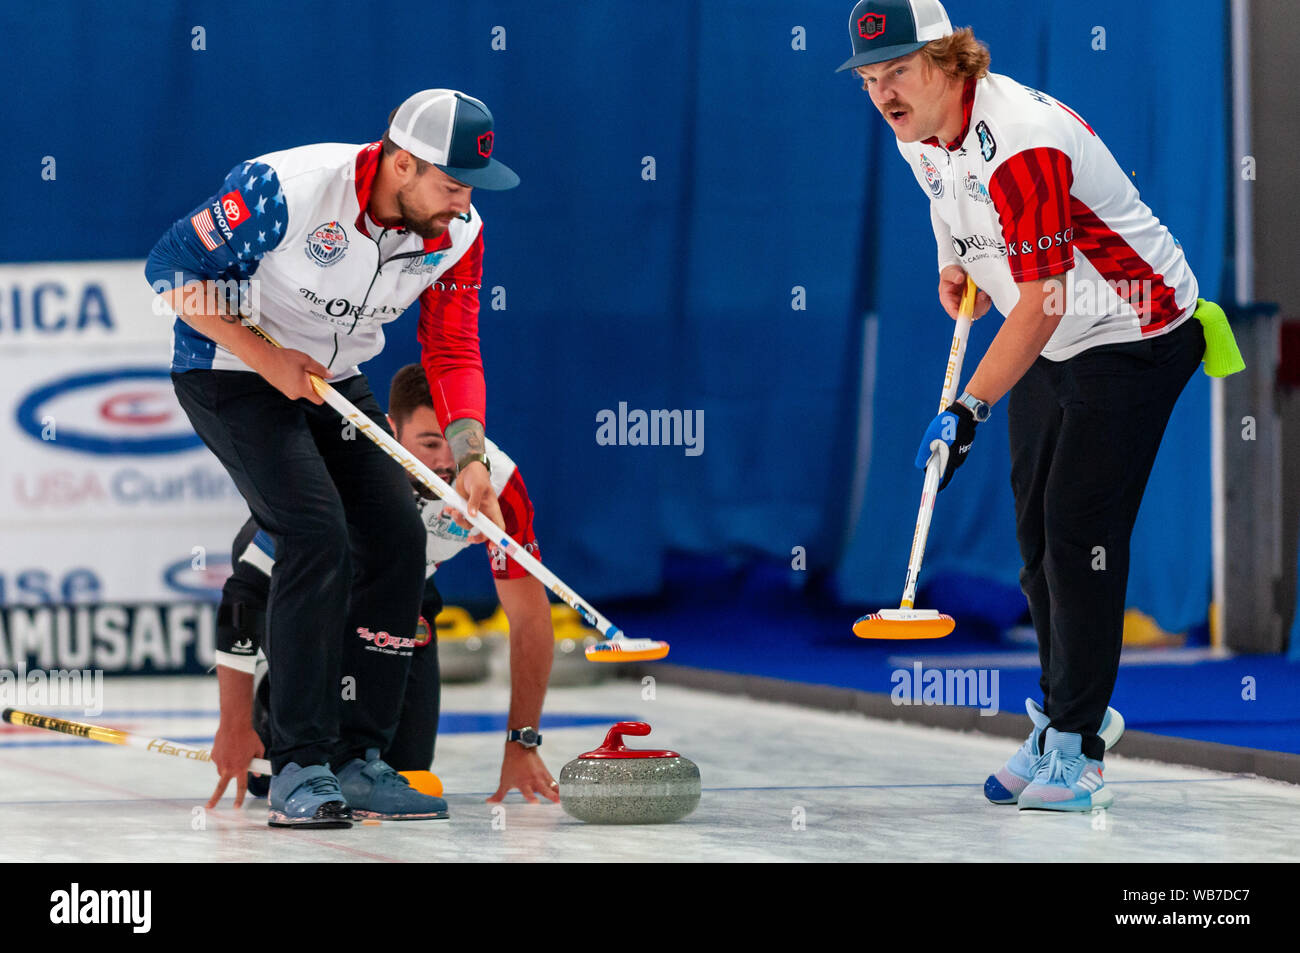 Raleigh, North Carolina, USA. 24th Aug, 2019. Aug. 24, 2019 Ã RALEIGH, N.C., US - CHRIS PLYS, left, JOHN LANDSTEINER, center, and MATT HAMILTON of the United States in action during Curling Night in America at the Raleigh Ice Plex. Curling Night in America featured members of the U.S. Olympic menÃs gold medal team from the 2018 Winter Olympics in South Korea, the U.S. womenÃs team, as well as teams from Italy, Japan, and Scotland, Aug. 22-24, 2019. Credit: Timothy L. Hale/ZUMA Wire/Alamy Live News Stock Photo